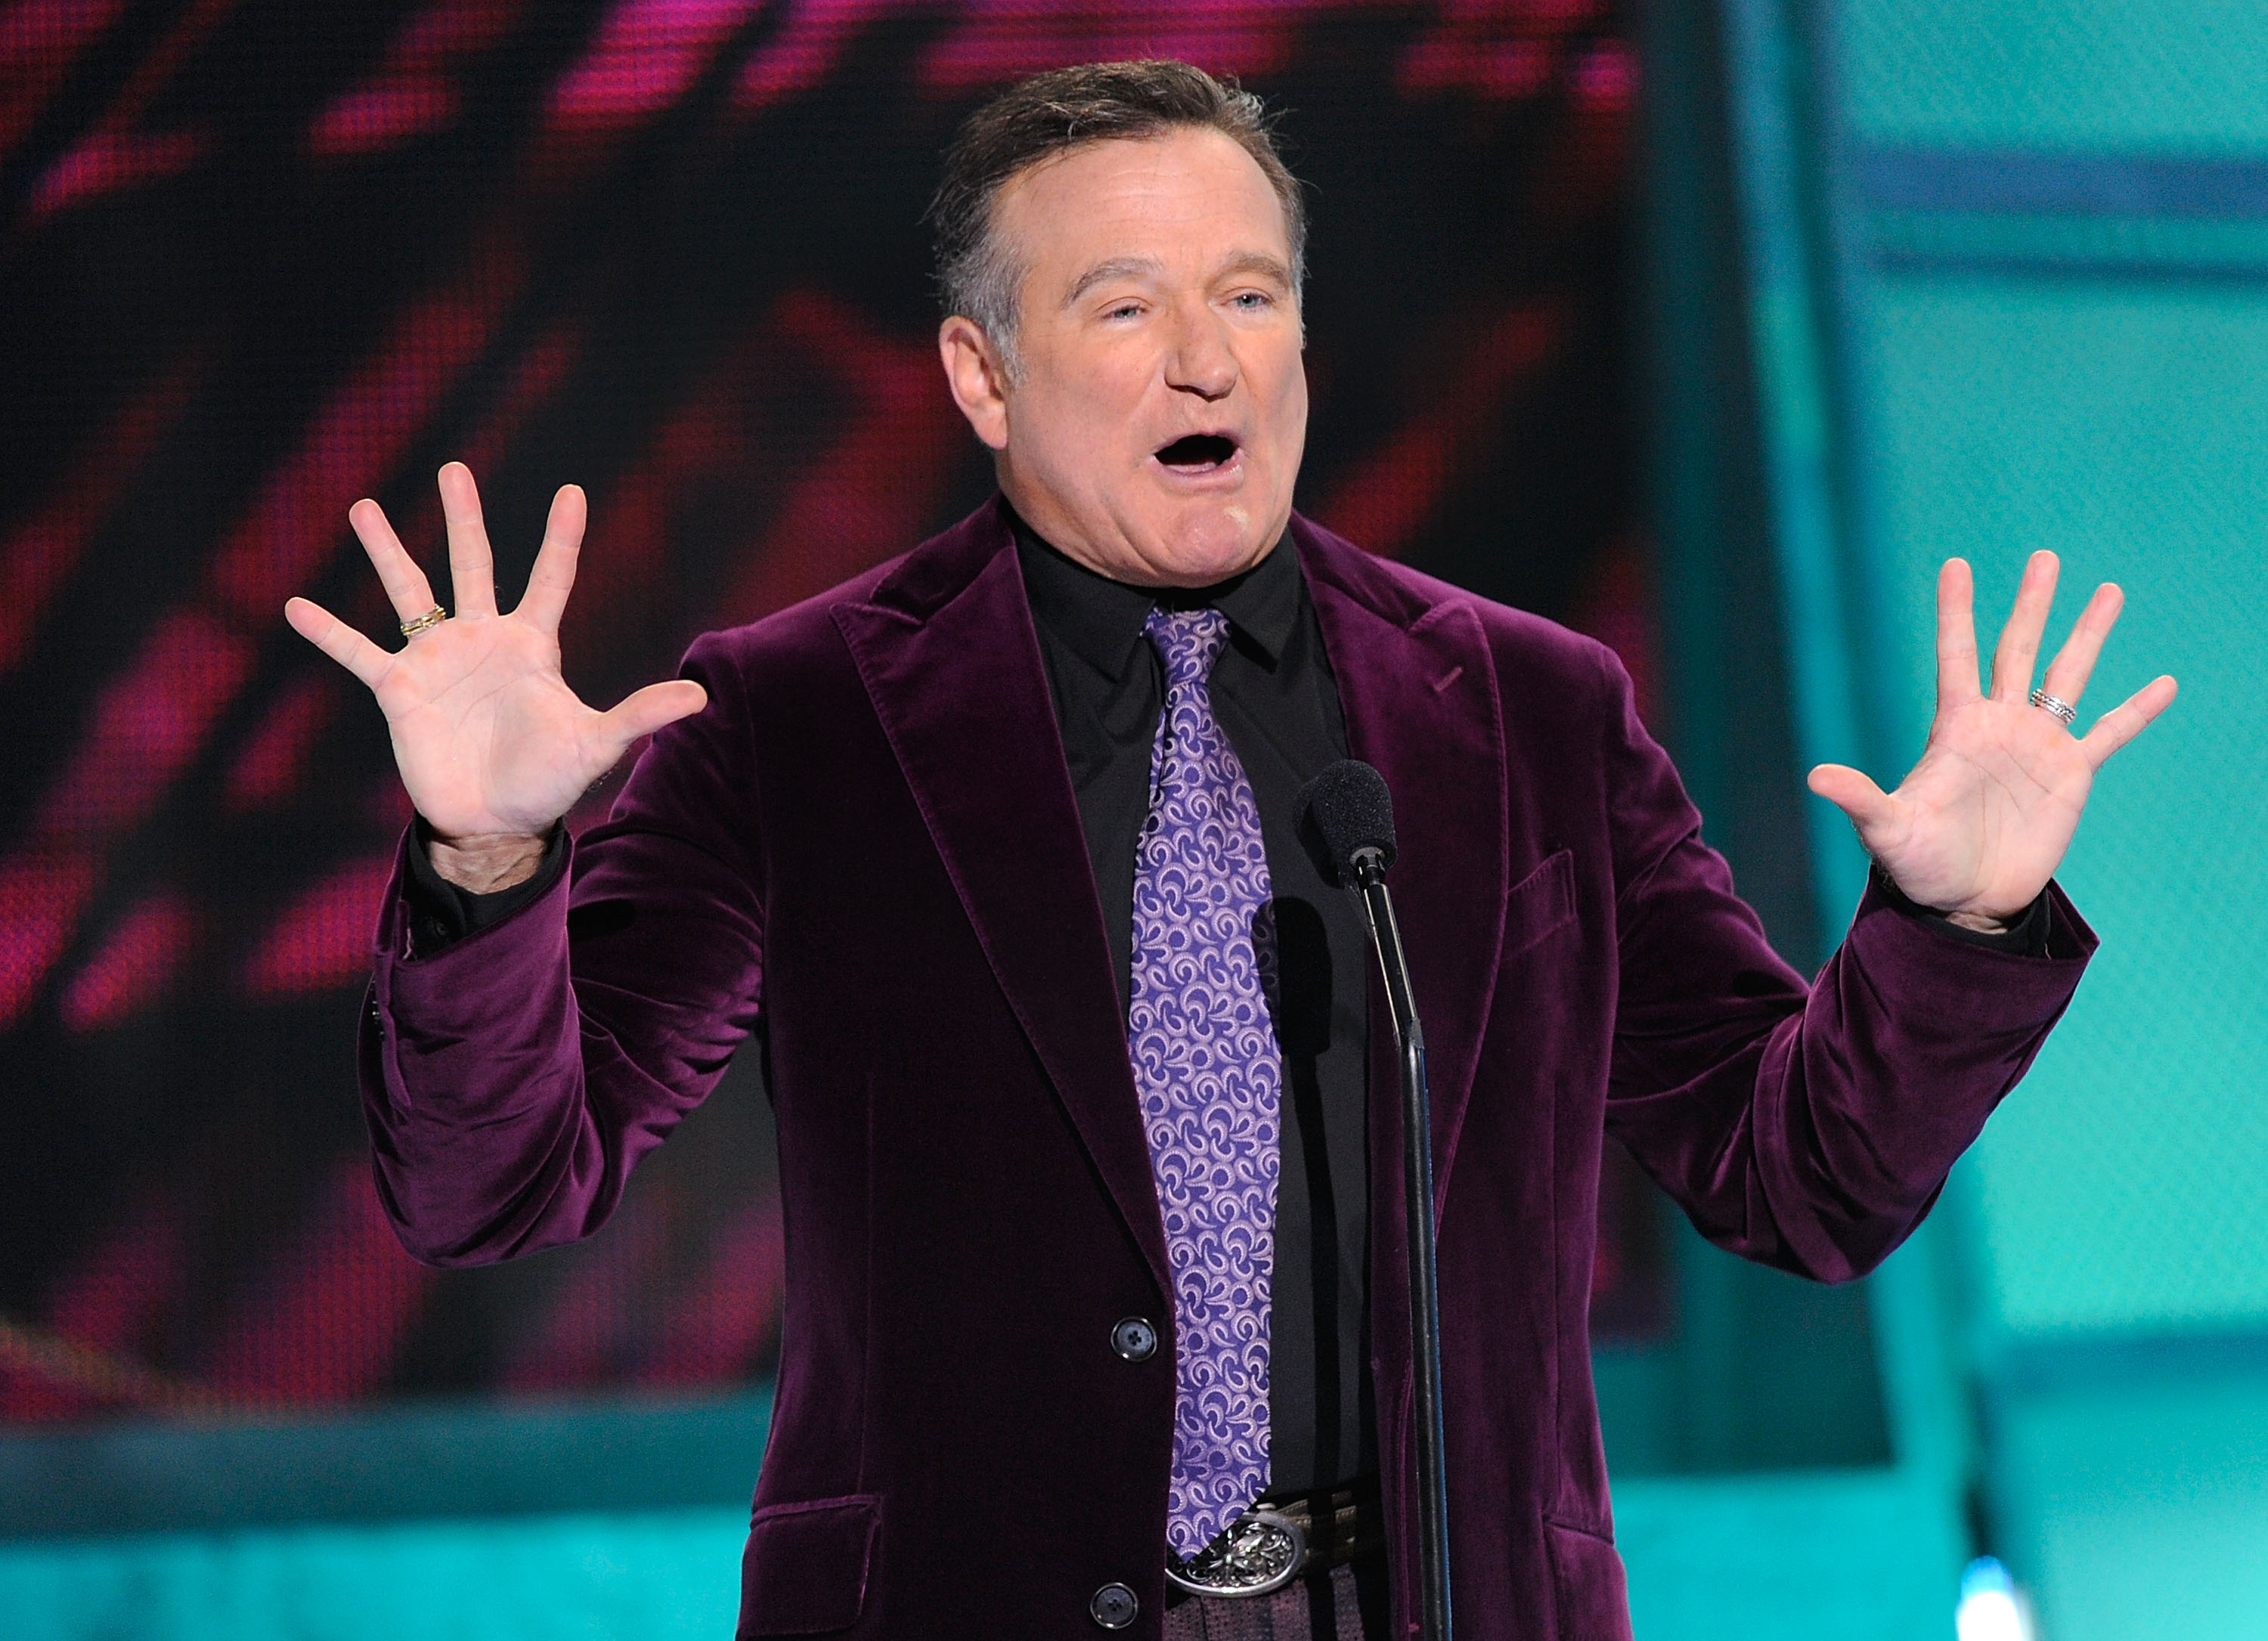 Robin Williams speaks during the 35th Annual People's Choice Awards in Los Angeles, California, on January 7, 2009 | Source: Getty Images